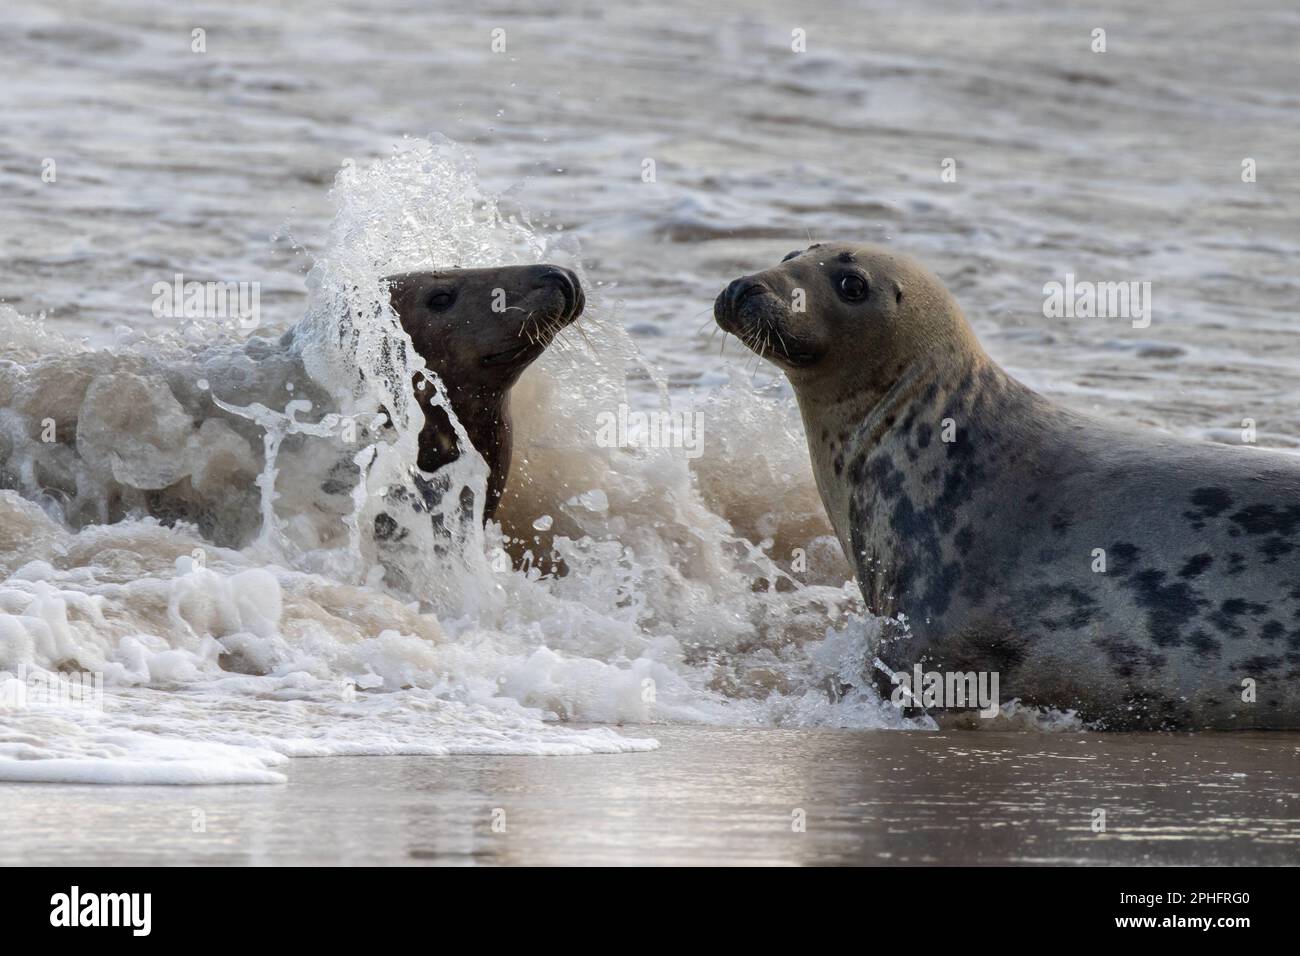 Splash time. Norfolk, UK: THESE COMICAL images show a Norfolk seal pulling funny faces including an impression of Homer Simpson?s famous ?Doh!? gestur Stock Photo